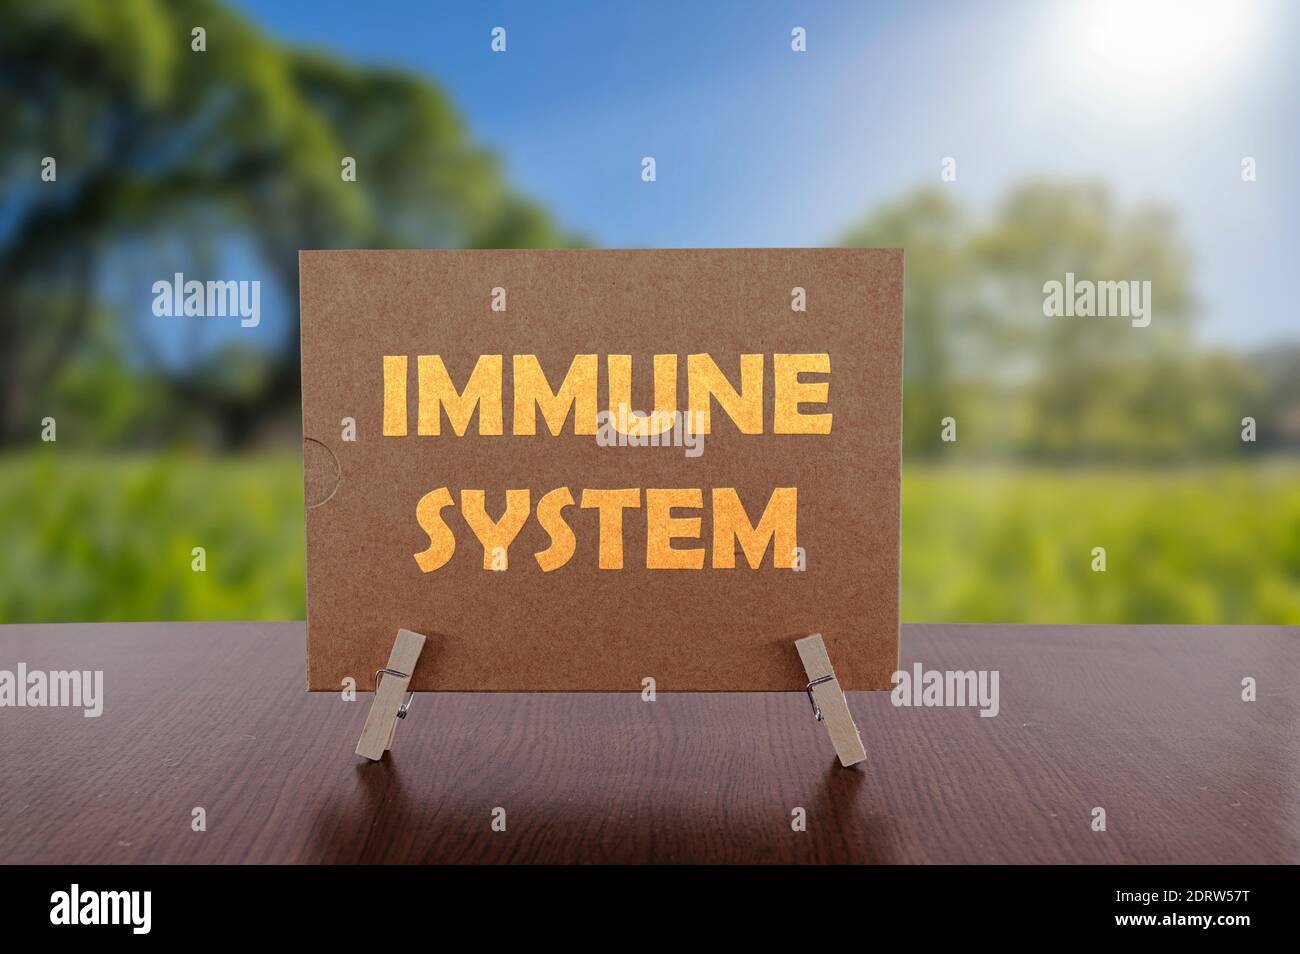 Immune system text on card on the table with sunny green park background. Health concept. Stock Photo